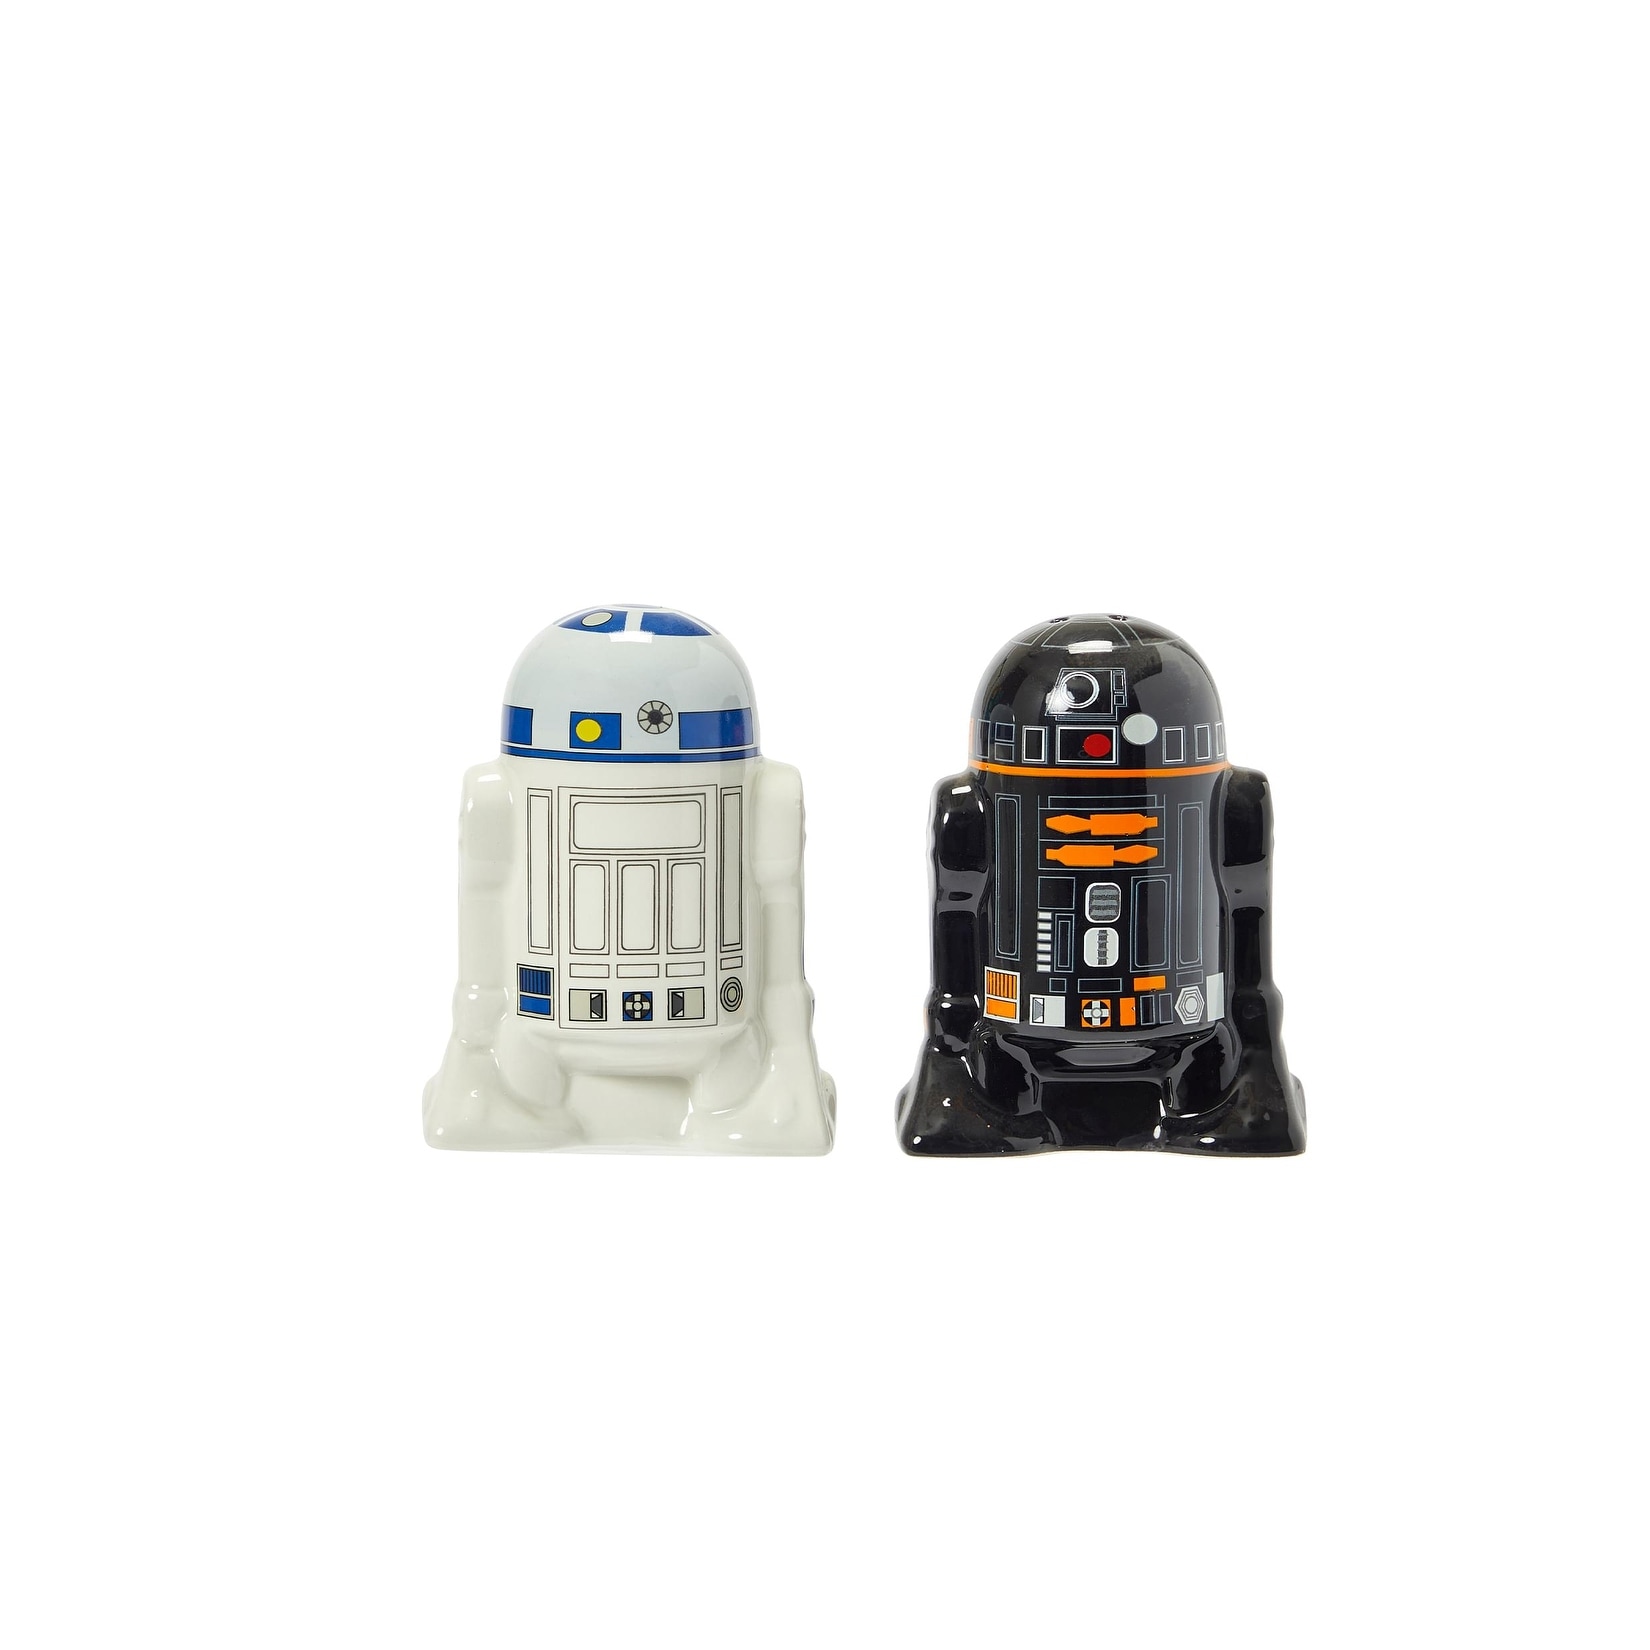 Star Wars BB-8 and D-O Ceramic Salt and Pepper Shakers Set of 2